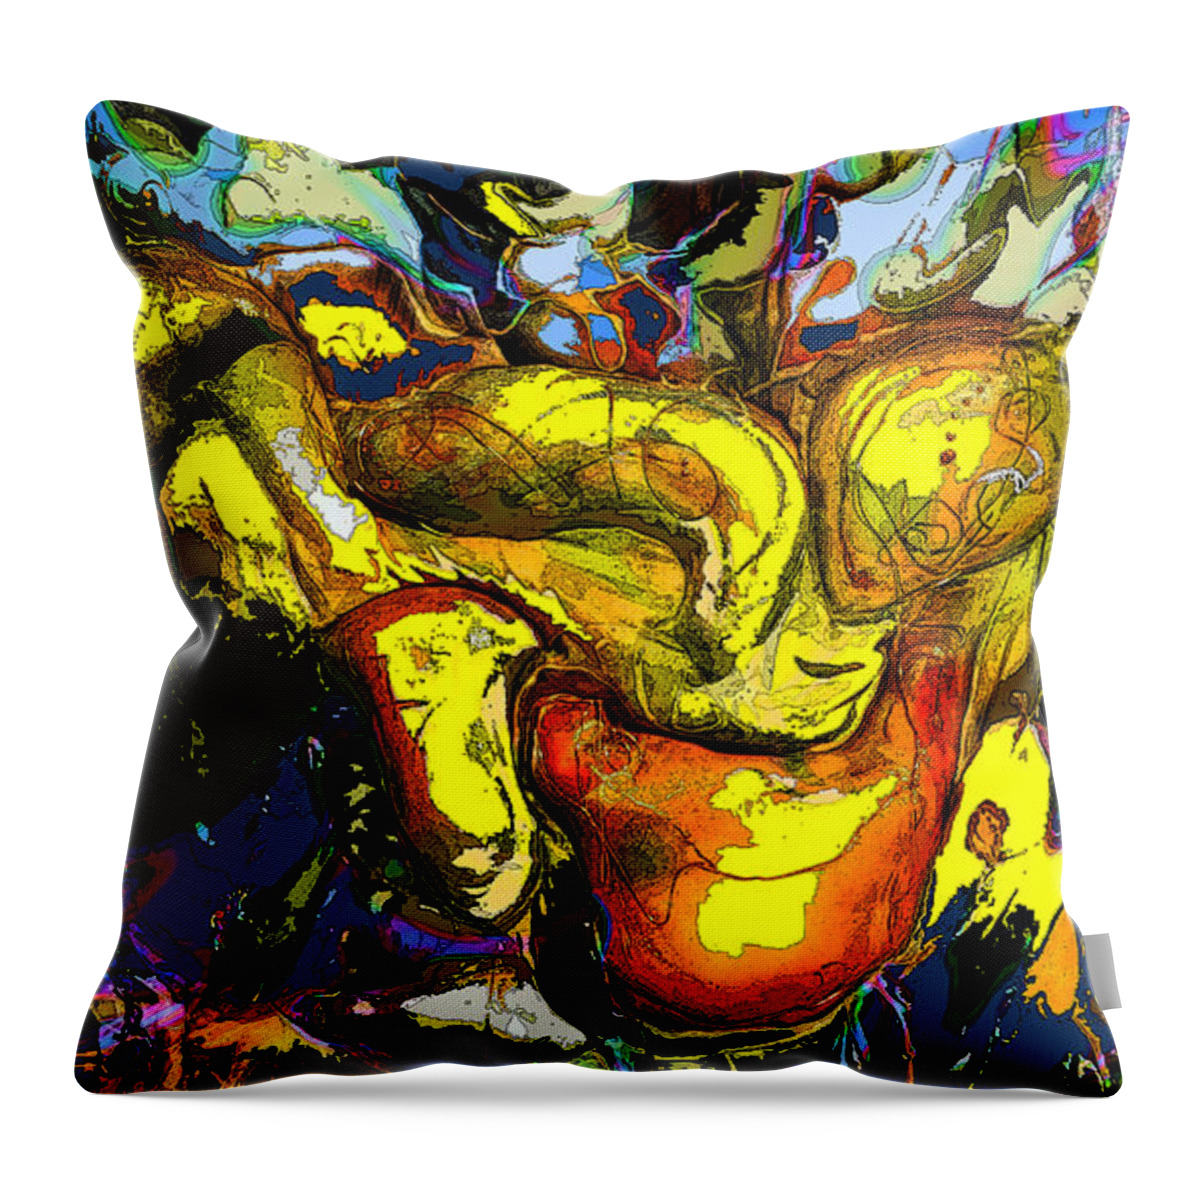 Abstract Throw Pillow featuring the digital art Infinite Complexity One by Ian MacDonald